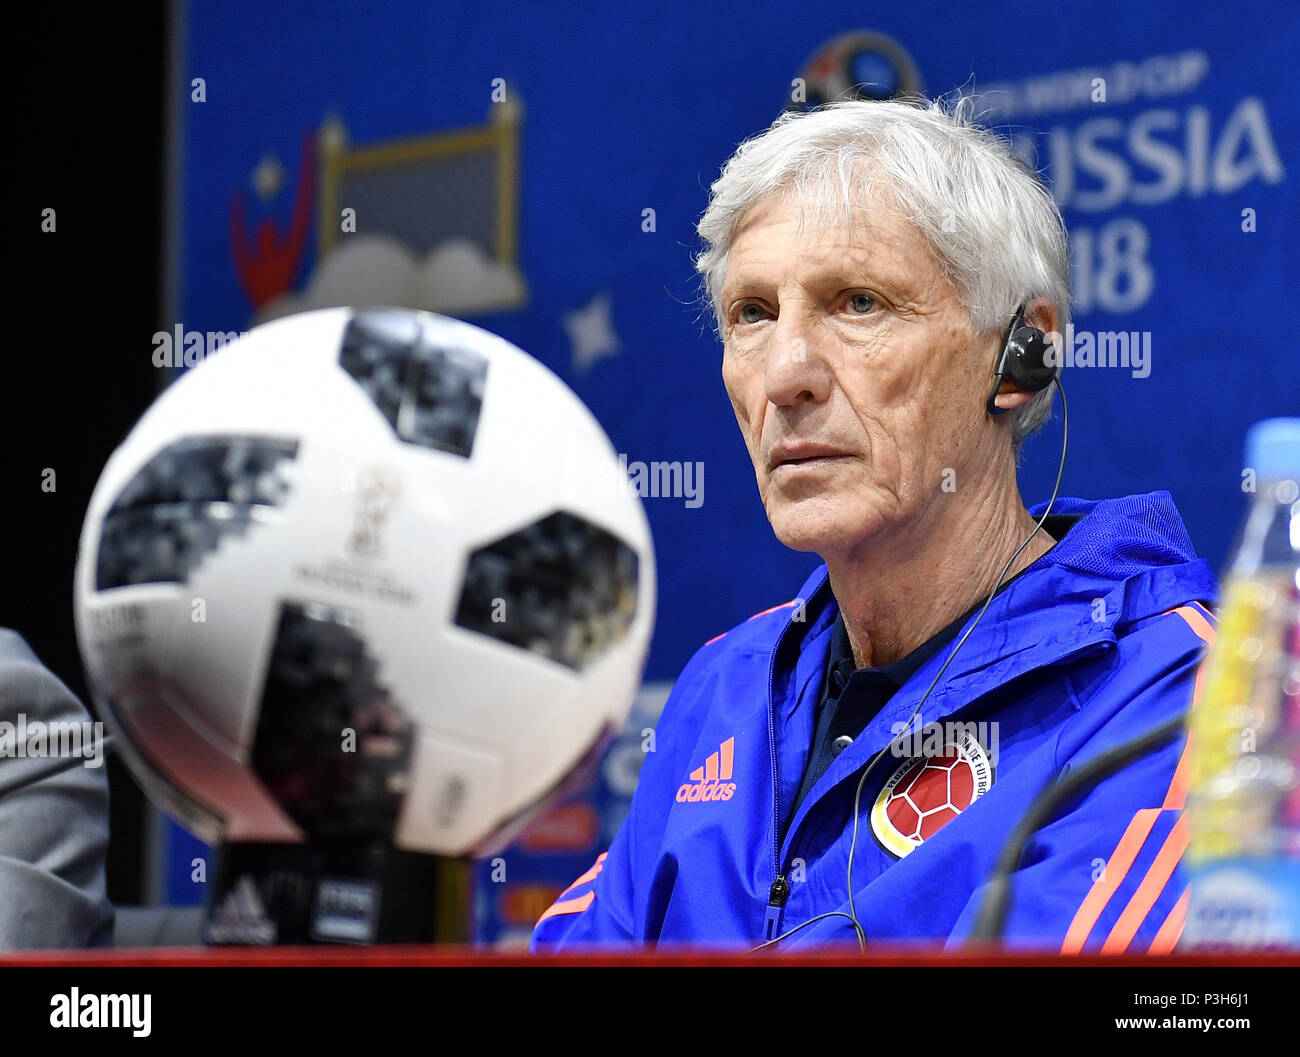 (180618) -- SARANSK, June 18, 2018(Xinhua) -- Colombian head coach Jose Pekerman attends a press conference during the 2018 FIFA World Cup in Saransk, Russia, on June 18, 2018. (Xinhua/He Canling) Stock Photo